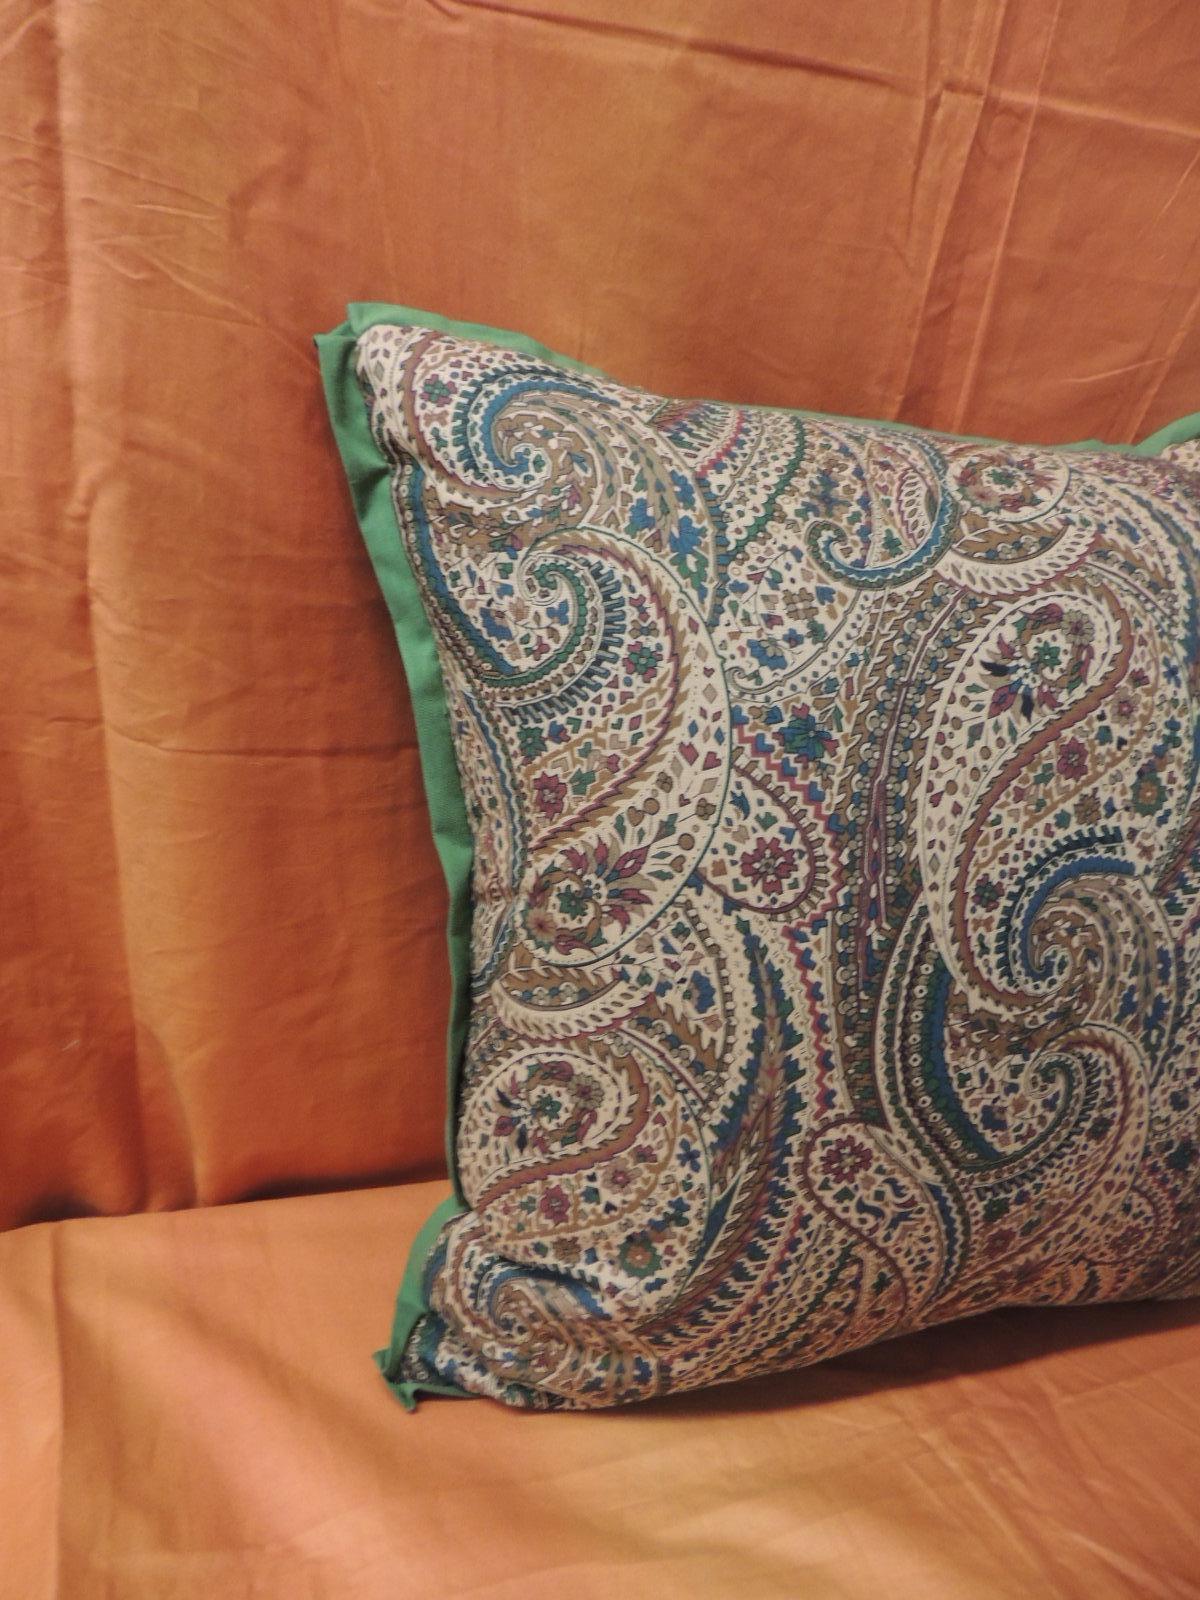 Printed paisley pillow with embellished with a hunter green flat ATG custom trim and moss green linen backing. Decorative vintage textile pillow in shades of hunter green, moss green red, camel, blue and tan. Vintage decorative pillow handcrafted